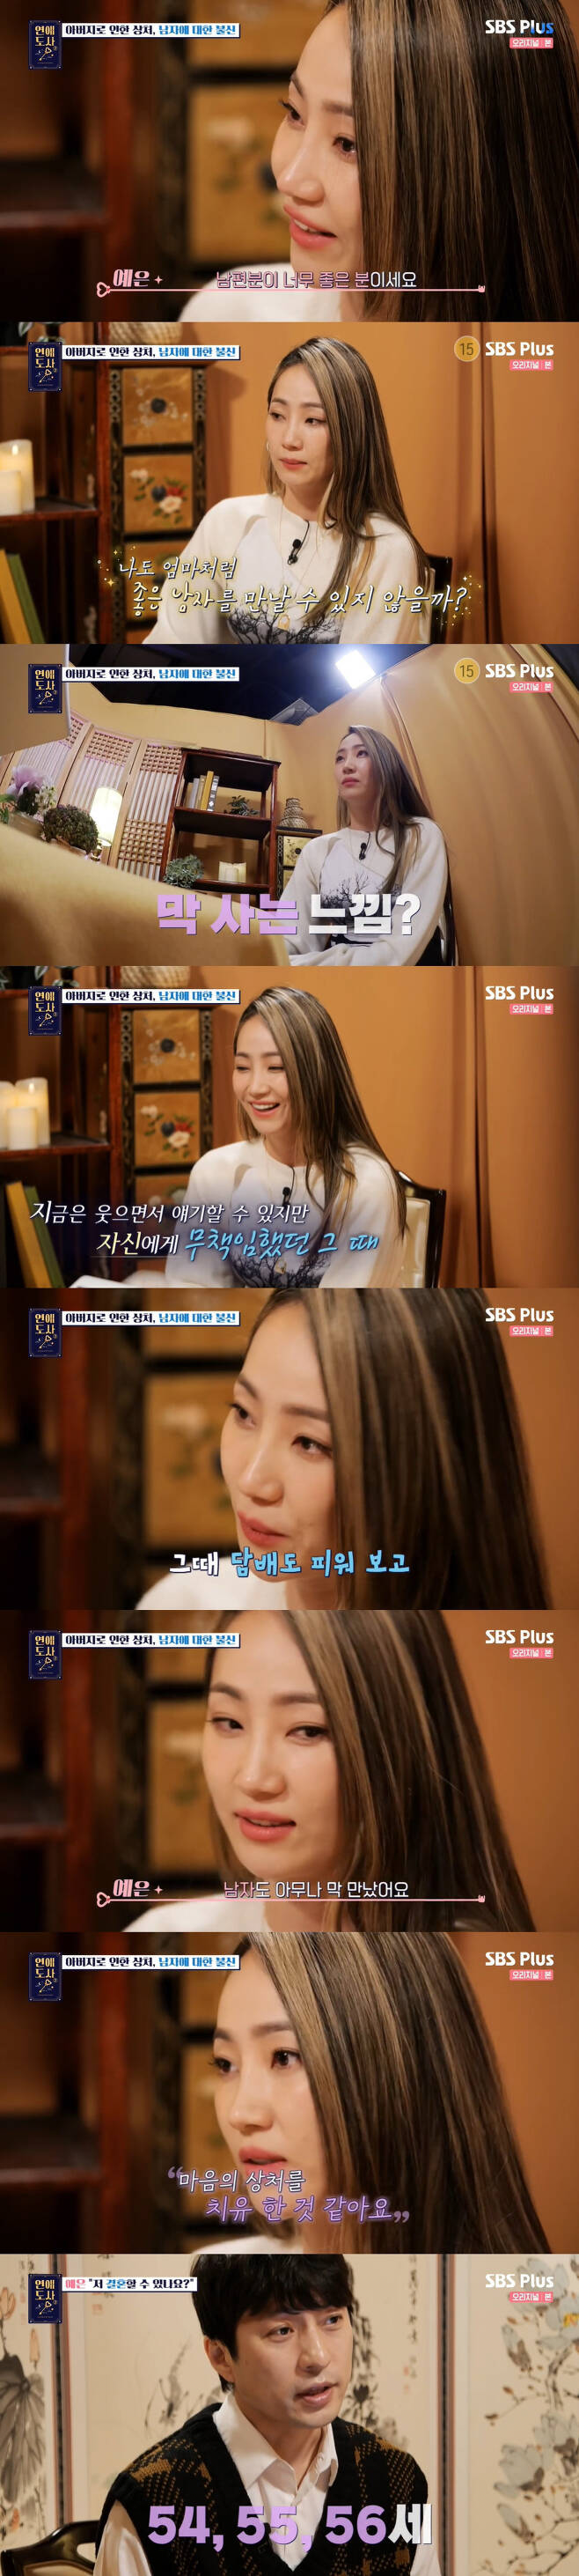 Love Dosa Park Ye-eun tears as he confides in his fatherIn the SBS Plus Love Dosa season 2, Park Ye-eun Park Ye-eun expressed his worries and worries about marriage.On this day, Park Ye-eun is famous for his autobiographical song lyrics: I did a lot of bright songs during Wonder Girls, and Park Ye-eun worked a lot on stories inside.There are many sad stories, he said.Park Ye-eun said: I hate lying, I had a friend who lied when I just opened his mouth.I found a paper in the car, but it was a parking pass.  It was not my house, his house, and the time was 5 am. I could not excuse it. I think I have done love more than 10 times, he said. I think about marriage every time I do love.Park Ye-eun, who met Sajudo after that, said, I can marriage. If I can be happy, I want to marriage, but I do not want to be unhappy because I marriage.My mother did a divorce, but now she remarried and lived happily, but I know how hard it was after divorce, so I hate divorce.If you are marriage, I want to do it when the probability of divorce is less than 0.1%, but I do not know people. Park Ye-euns owner, who is very strong and strong, is also a man who can not bear it. Park Ye-eun said, All love was a man in his 20s.When I was a child, I thought I was meeting my peers, but now that I am thirty-three, I am getting older, and the men are getting younger.Park Ye-eun wept, also referring to his father.Park Ye-eun was arrested for the Records of the Grand Historian crime at the stage of a new start at the time of moving the company after a decade at JYP.Park Ye-eun said, When I was a child, my parents gave me a duty, so I did not see it for a very long time and hated it a lot.I started to contact and meet again three to four years before I was arrested for the Records of the Grand Historian, he said. I thought it was because I did not have confidence in my father because I could not trust a man.I thought I should restore my relationship with my father. Park Ye-eun said: Im so sorry, Im sorry I hurt you so much when I was a kid.I thought that I was Lee Yong when the incident broke out. He said, My father was my father.It seems impossible to believe in people. Especially to believe in men. Park Ye-eun, who put himself down a lot at the time, said, Do you feel like living? I smoke tobacco, drink a lot of alcohol, and meet a man.The company, which later judged Park Ye-euns condition to be poor, recommended psychological counseling, and said, I received about a year, I think I healed the wound while talking about it.Park Ye-eun said: Fortunately, my mother remarried, she did it seven years ago and her husband is a good person.I am living with my mother and receiving all the love that my mother did not receive.  I also thought positively that I could meet a good man. I like the person who accepts and accepts me, said Cold Dosa, who was 54, 55, and 56 years old when Park Ye-eun was lucky to be marriage.